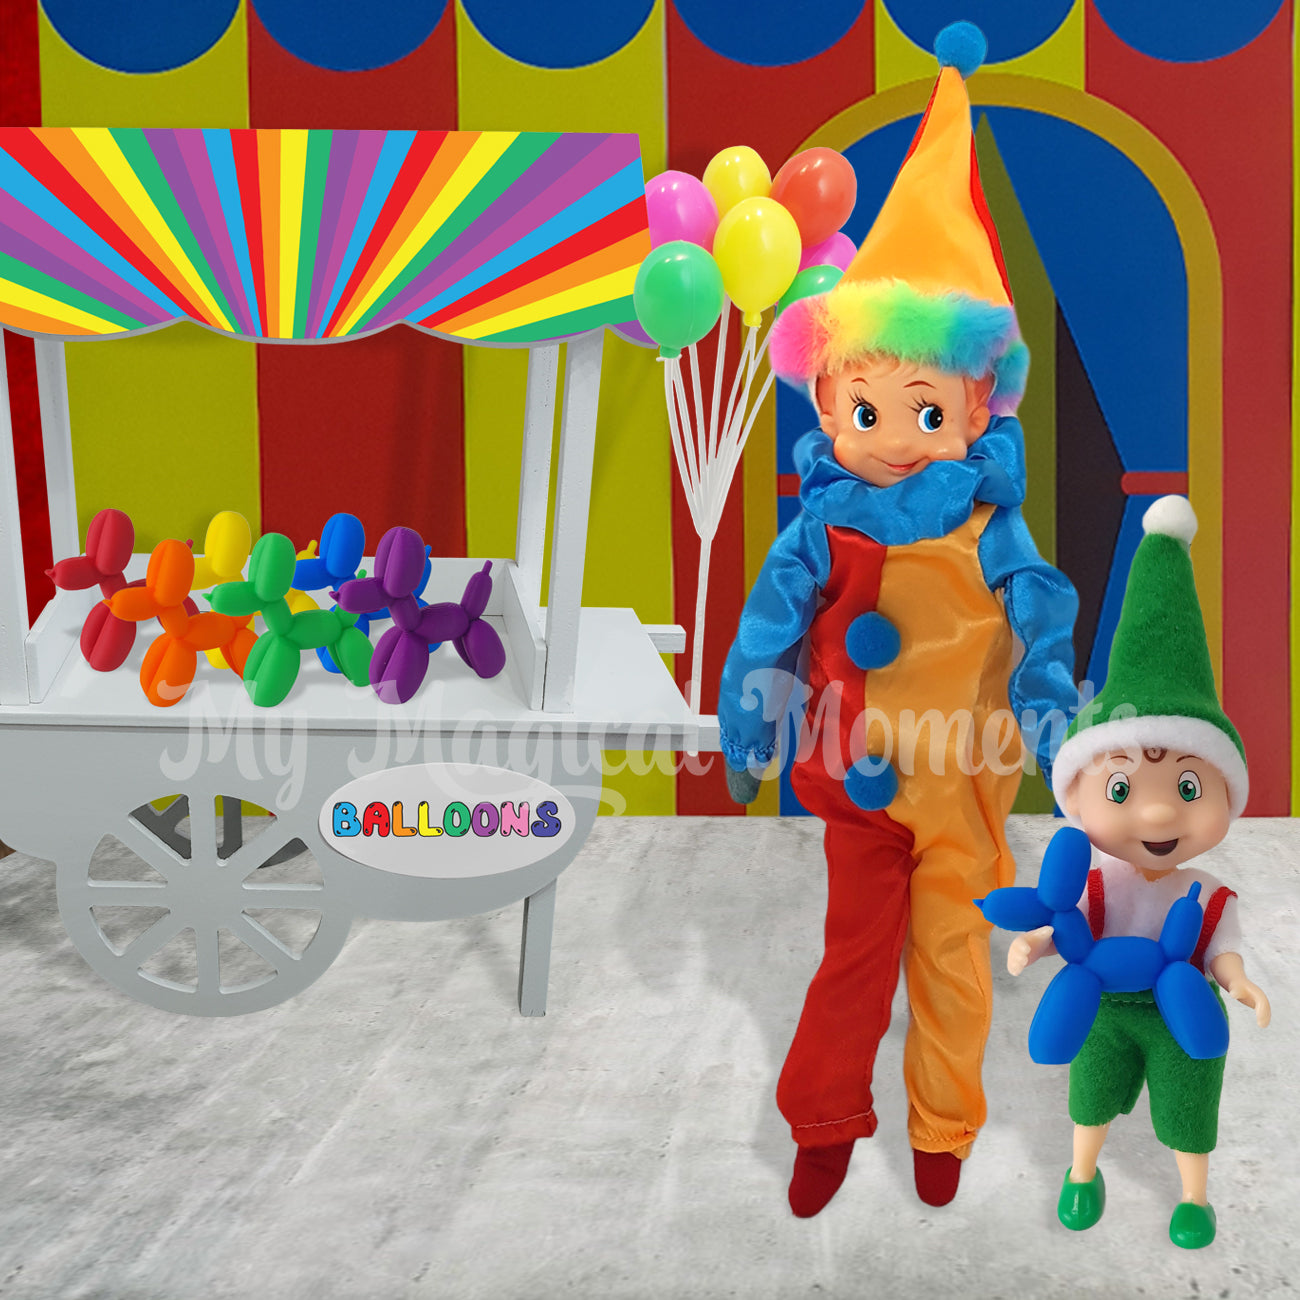 Vintage elf dressed in a clown costume handing out balloon animals to a elf toddler at the circus